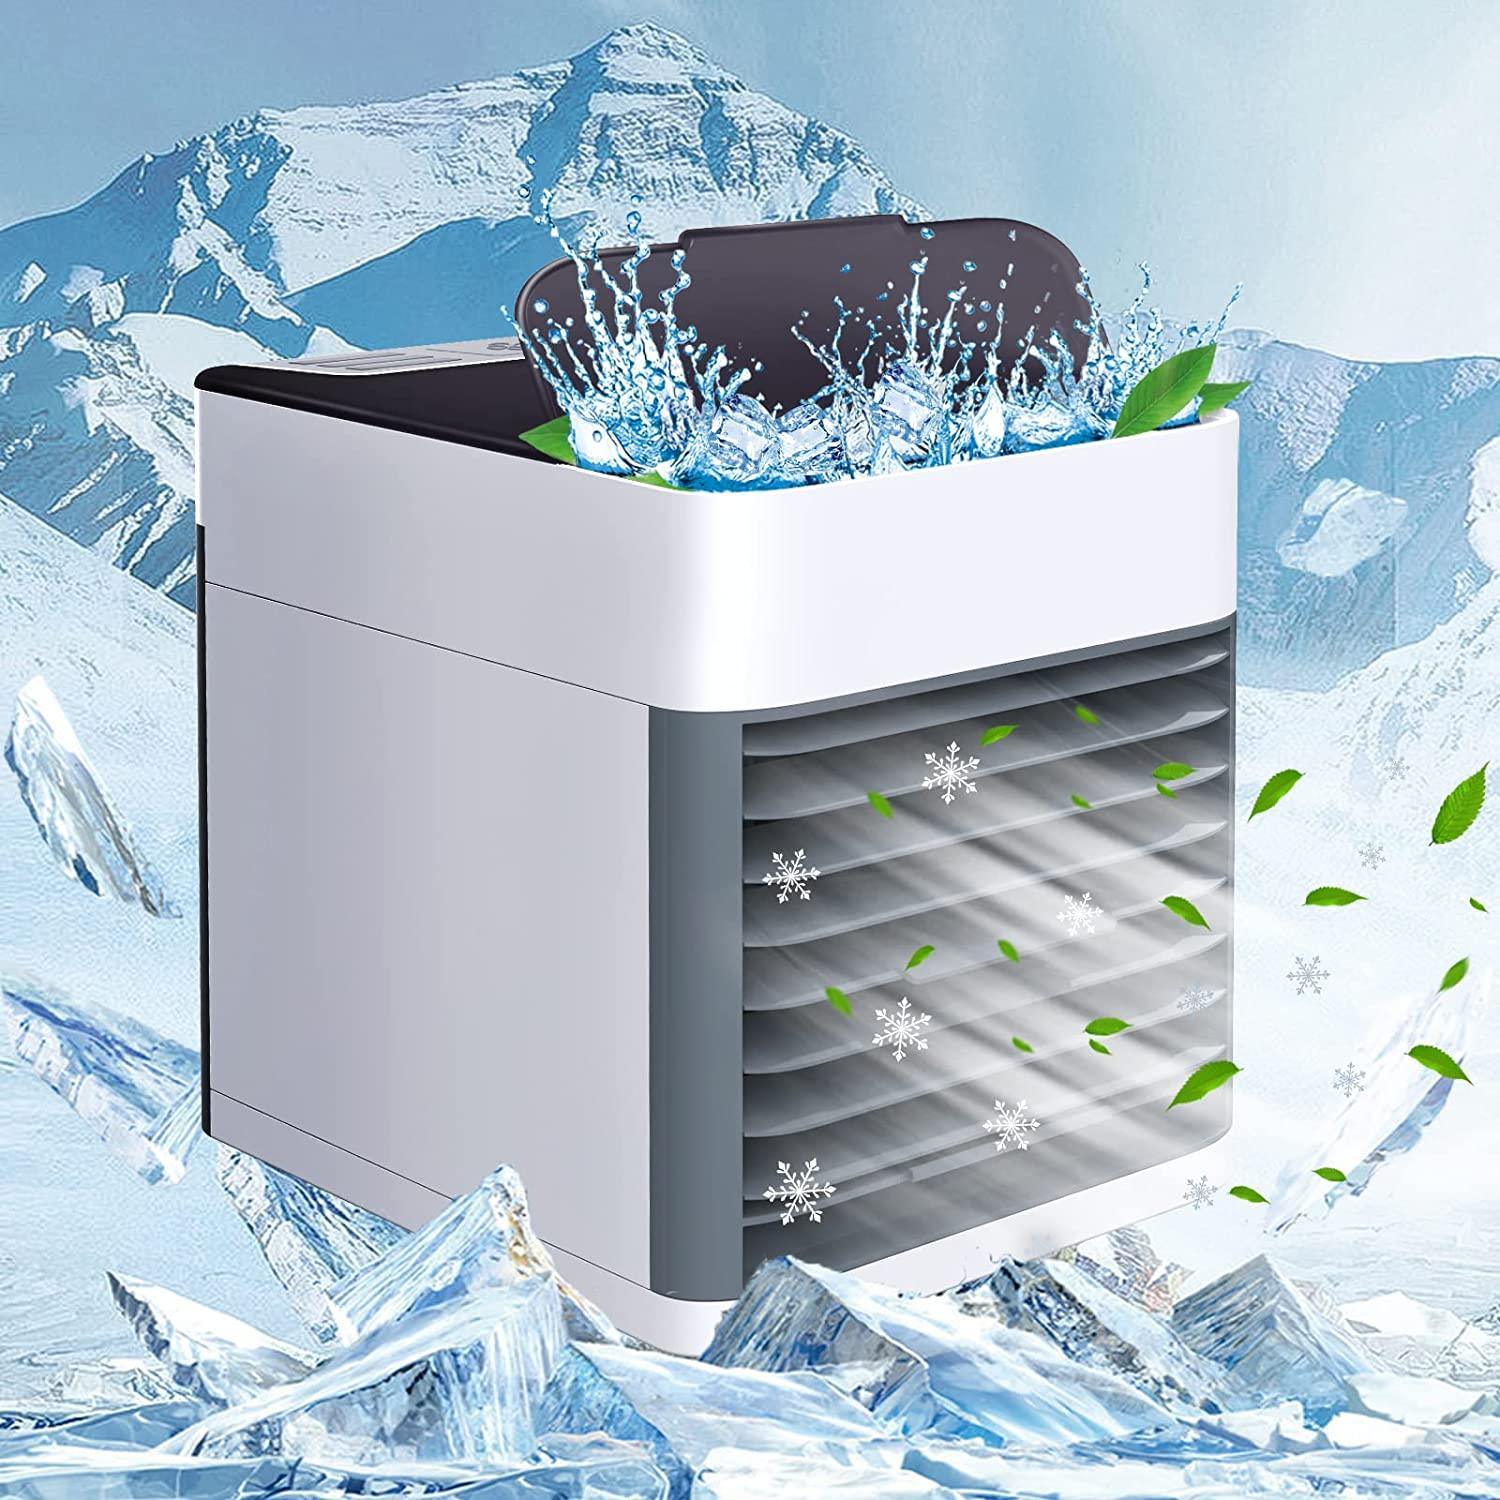 Arctic Air Portable 3 In 1 Conditioner Humidifier Purifier Mini Cooler - BelleBoutique.in